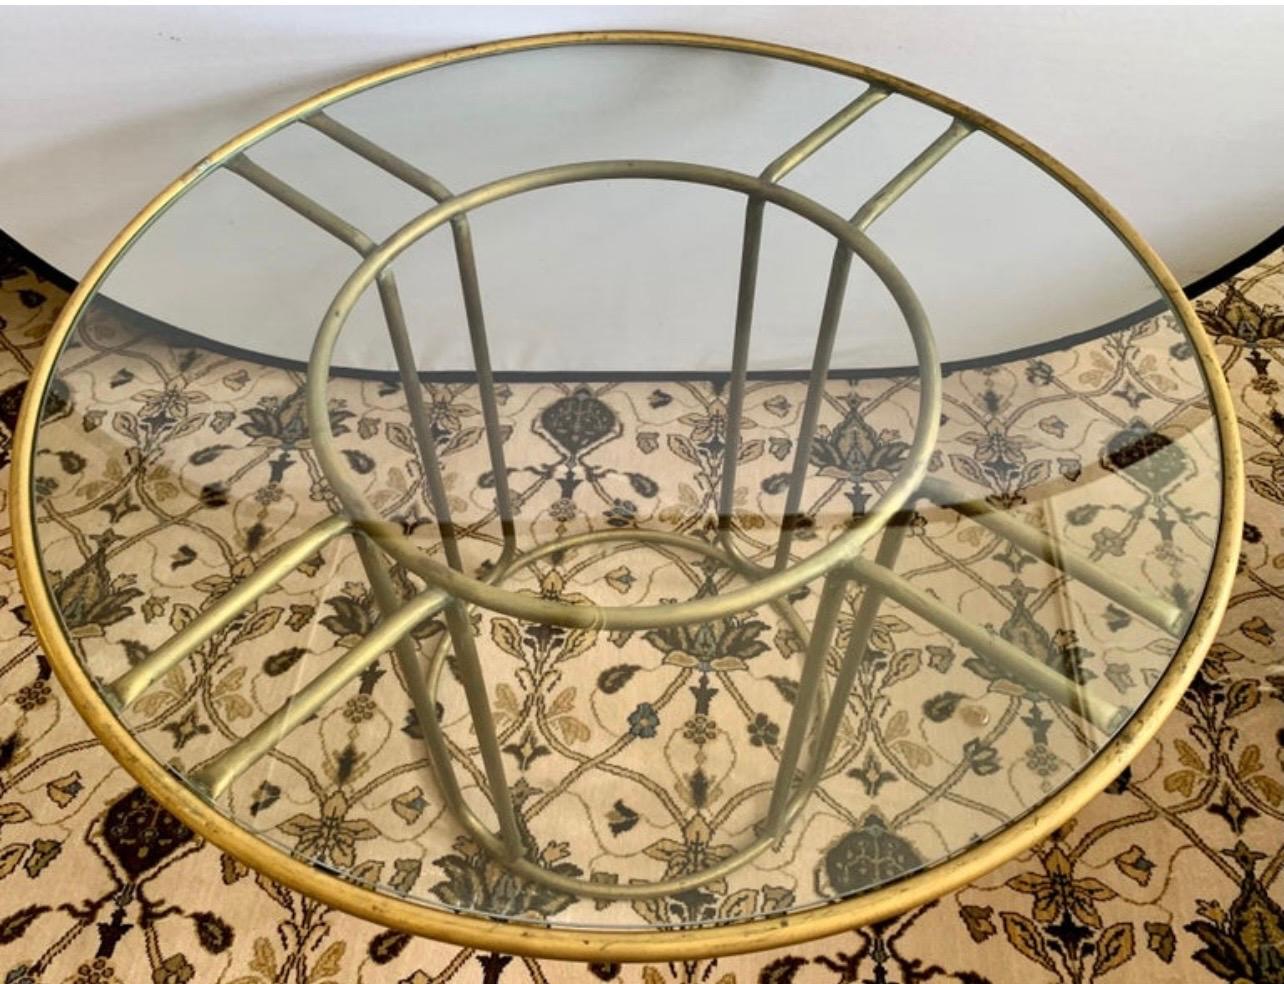 An iconic patio dining/bistro table in brass designed by Walter Lamb and produced by Brown Jordan. The round frame is supported by two concentric rings of brass with radial supports and a circular brass base. The round tabletop is a single piece of